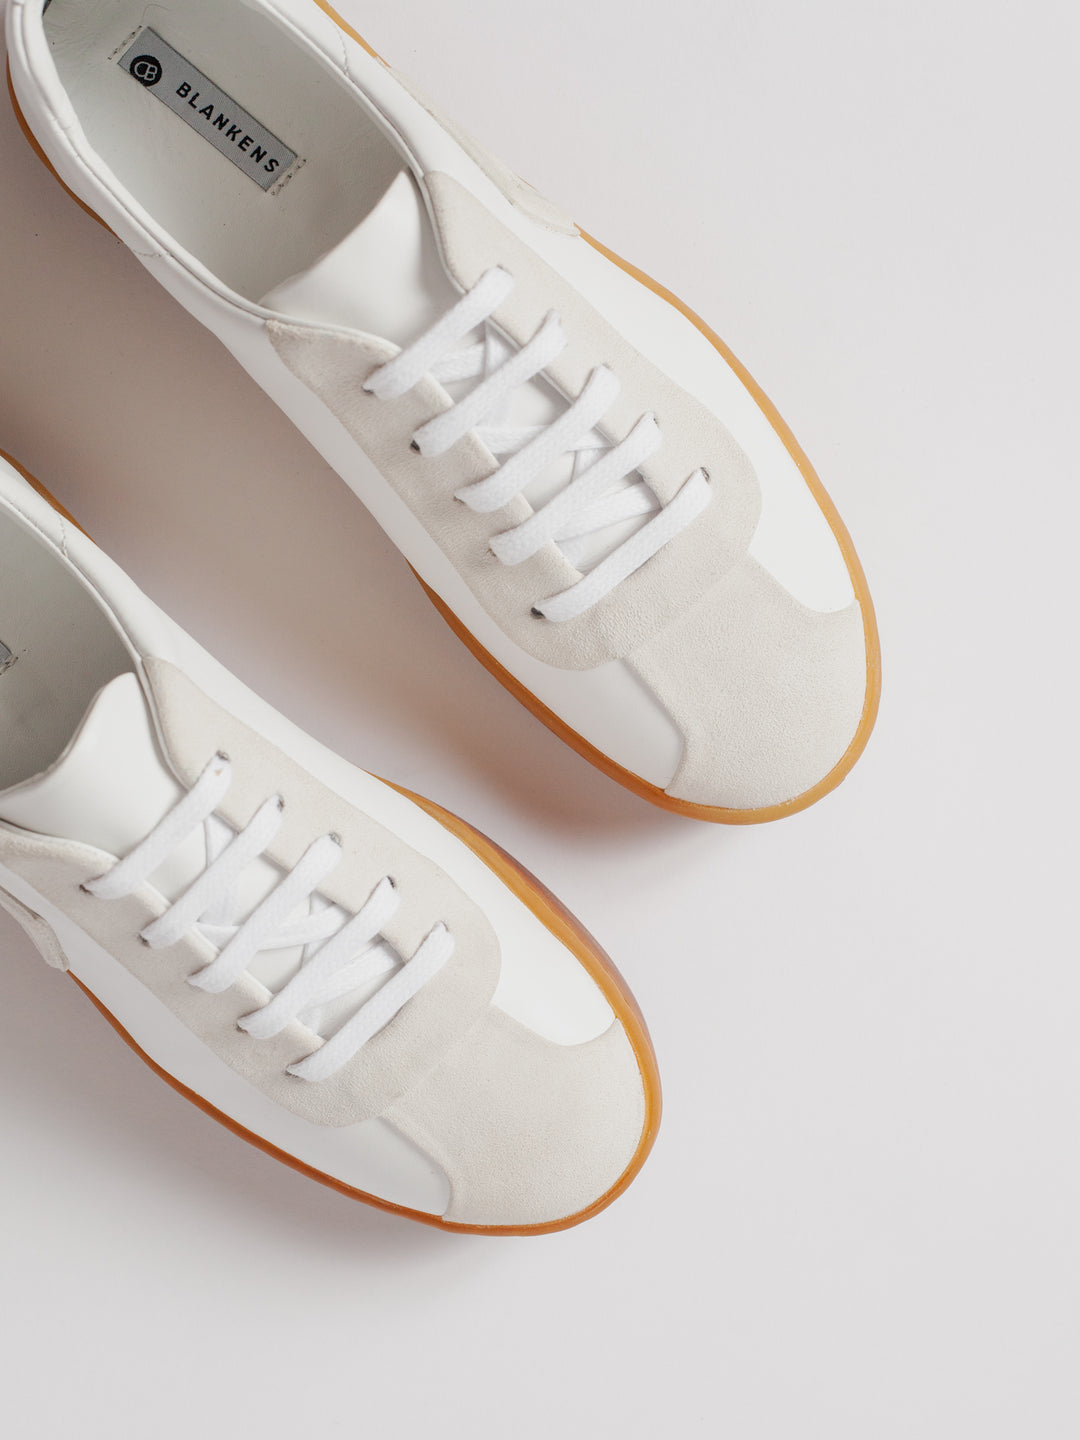 Blankens The Elin White Sneaker with brown rubber sole and B-detail